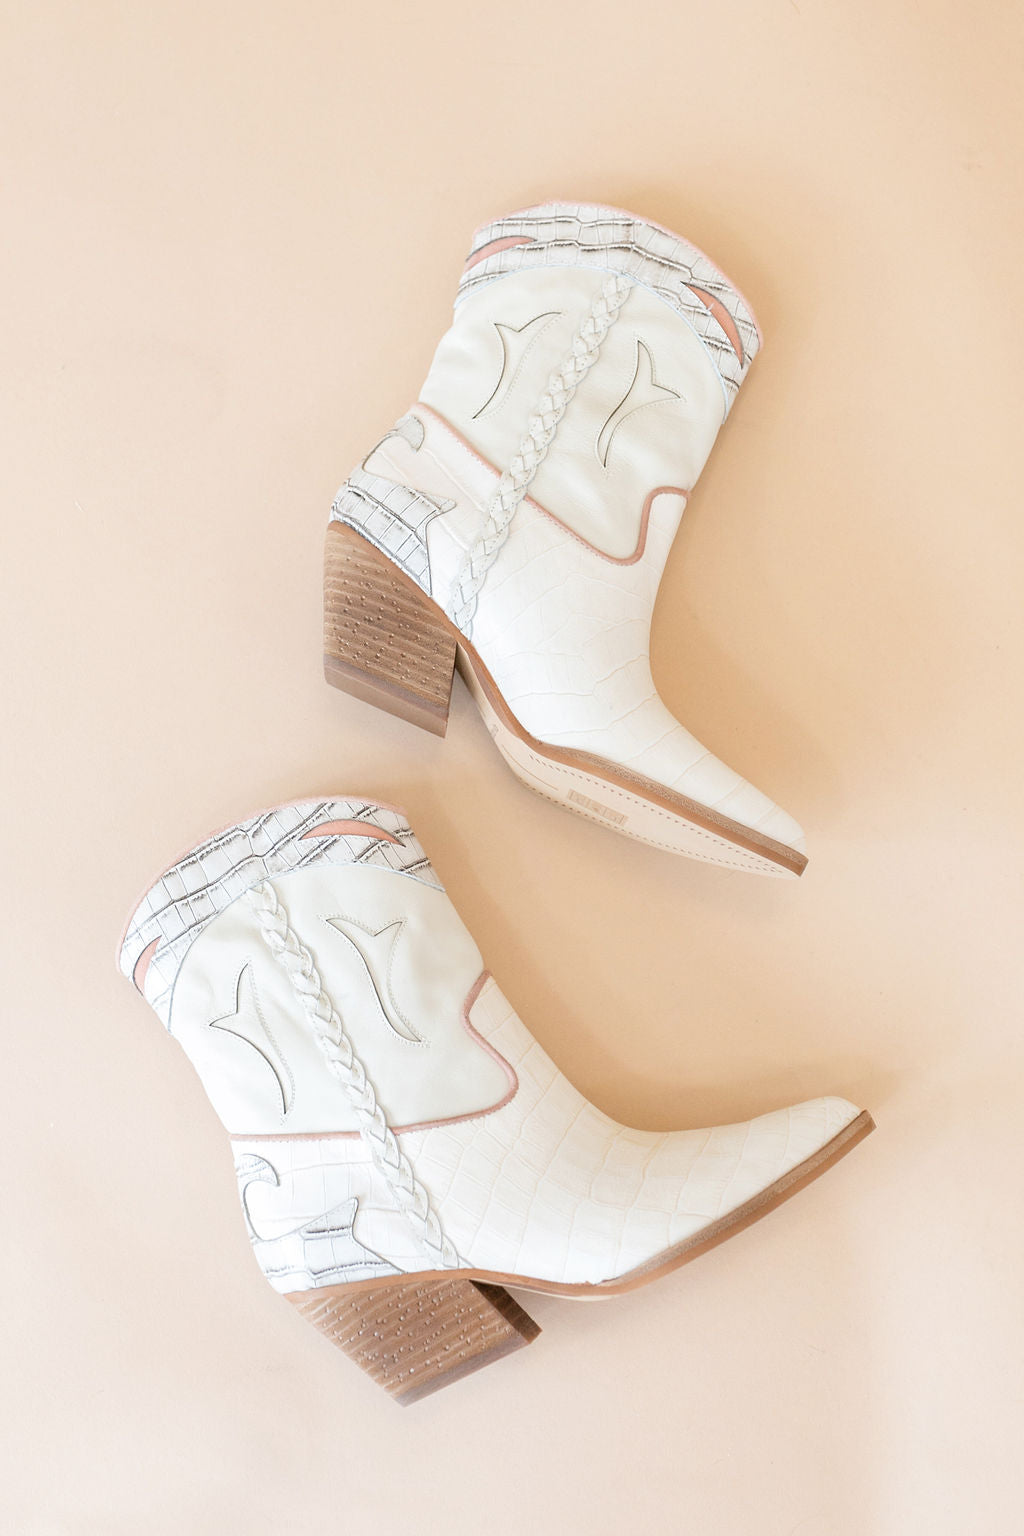 Dolce Vita | Loral Western Booties | Ivory Croc Print Leather - Poppy and Stella